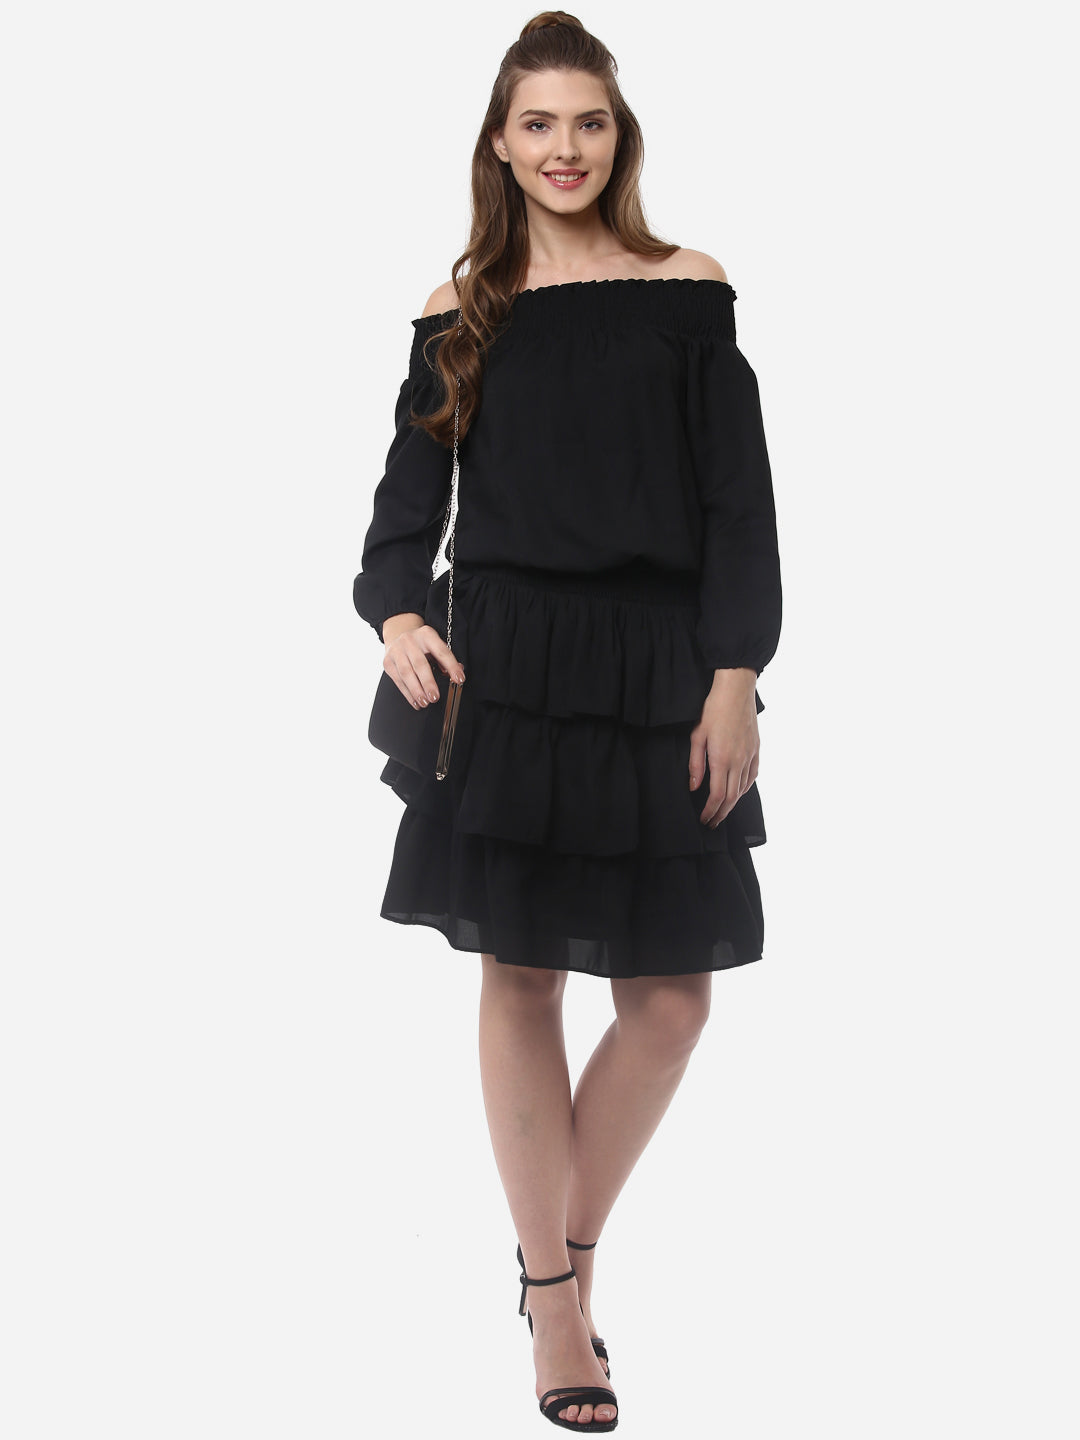 Women's Black Polyester Dress with Multiple Tiers